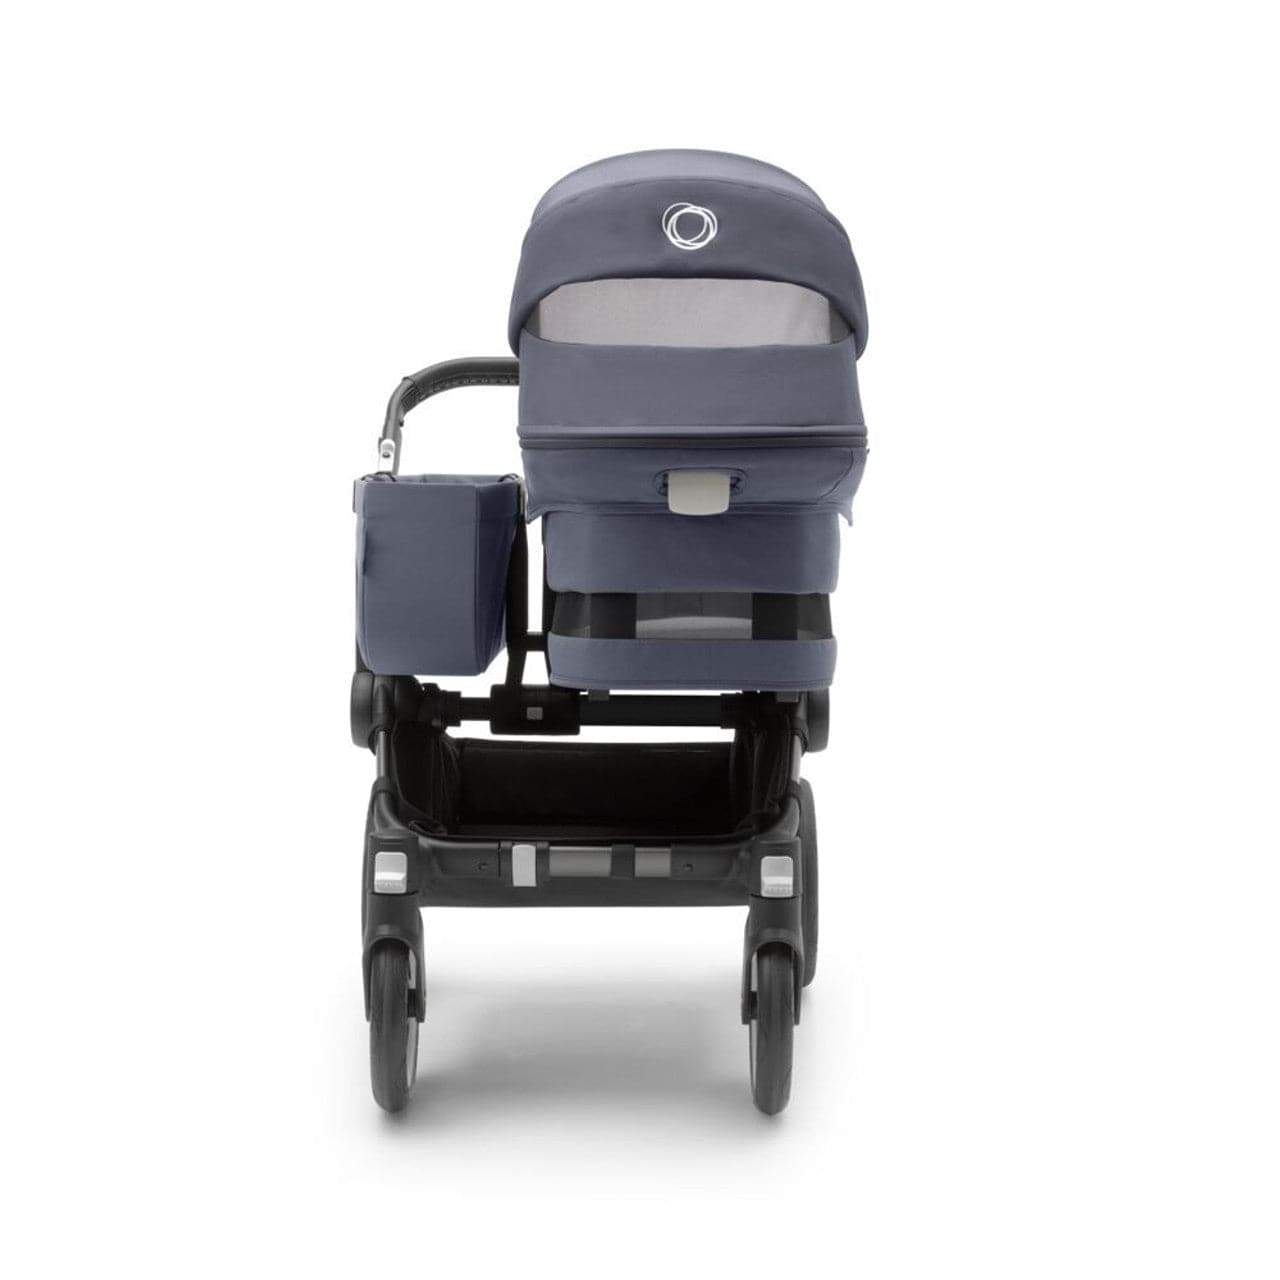 Bugaboo Donkey 5 Twin Complete Travel System + Turtle Air - Graphite/Stormy Blue - For Your Little One